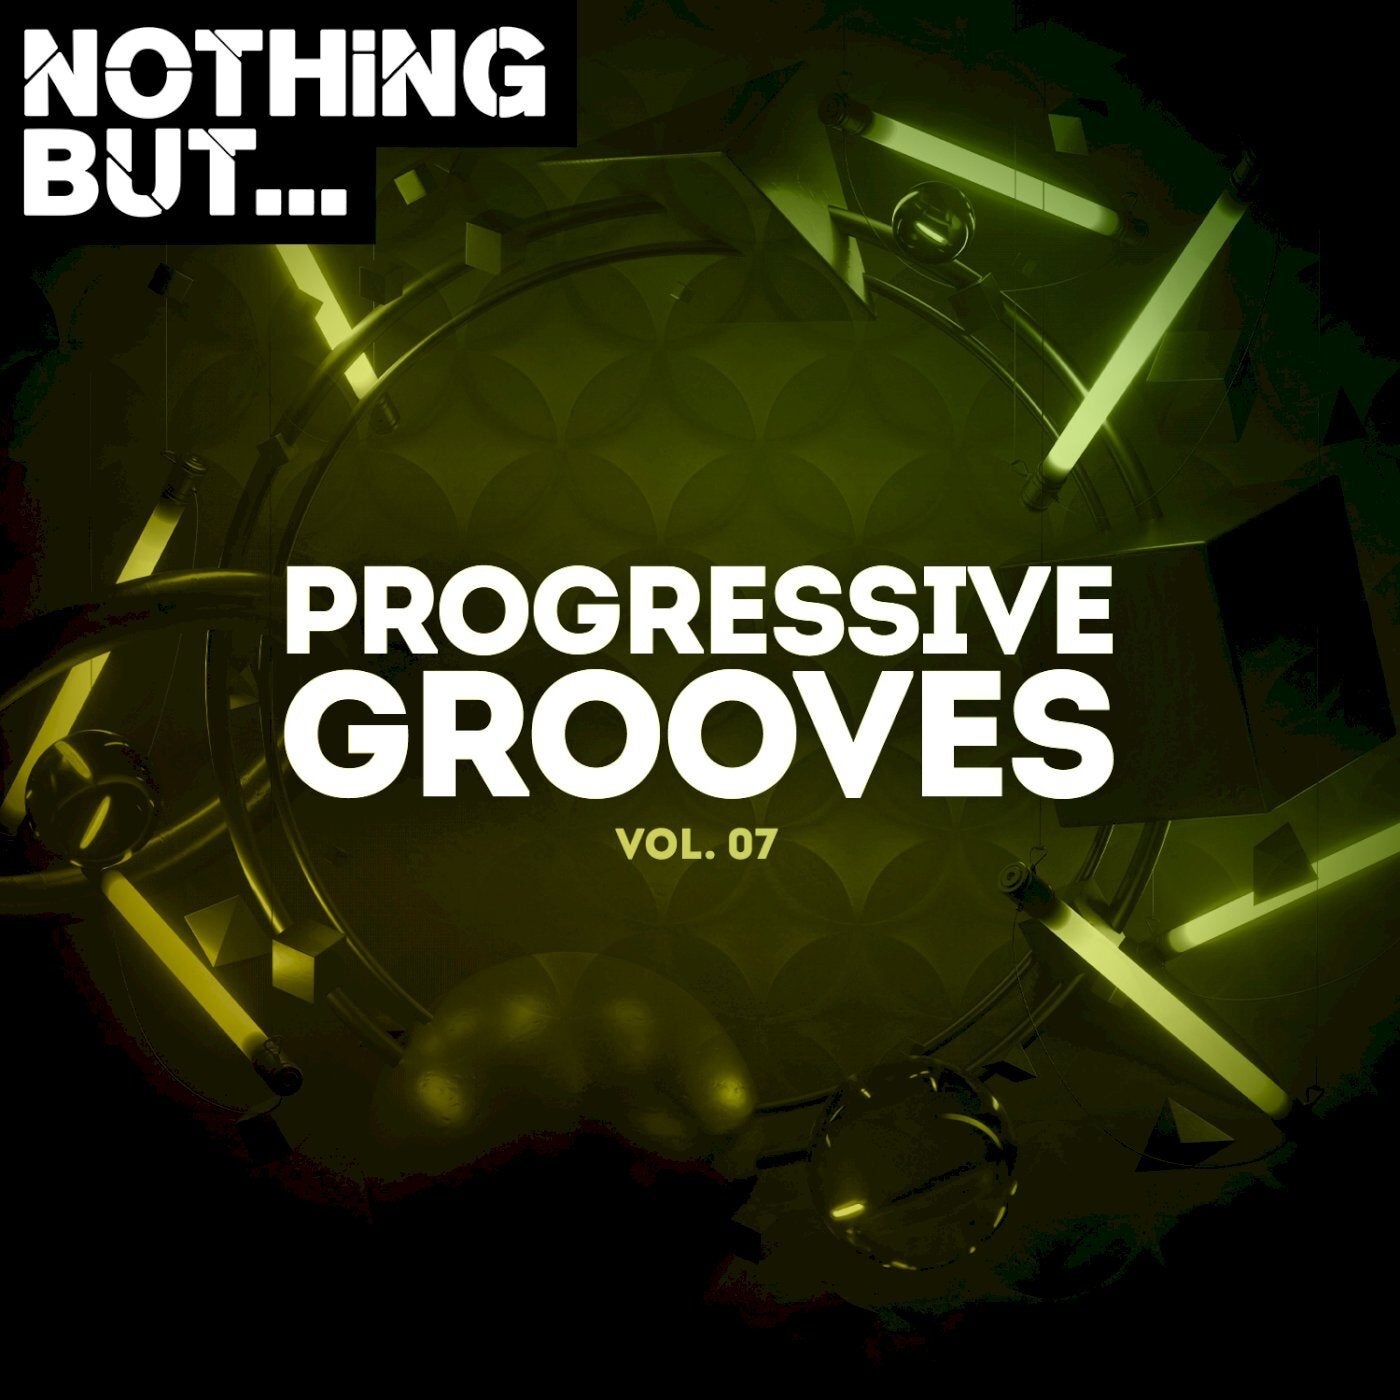 Nothing But... Progressive Grooves, Vol. 07